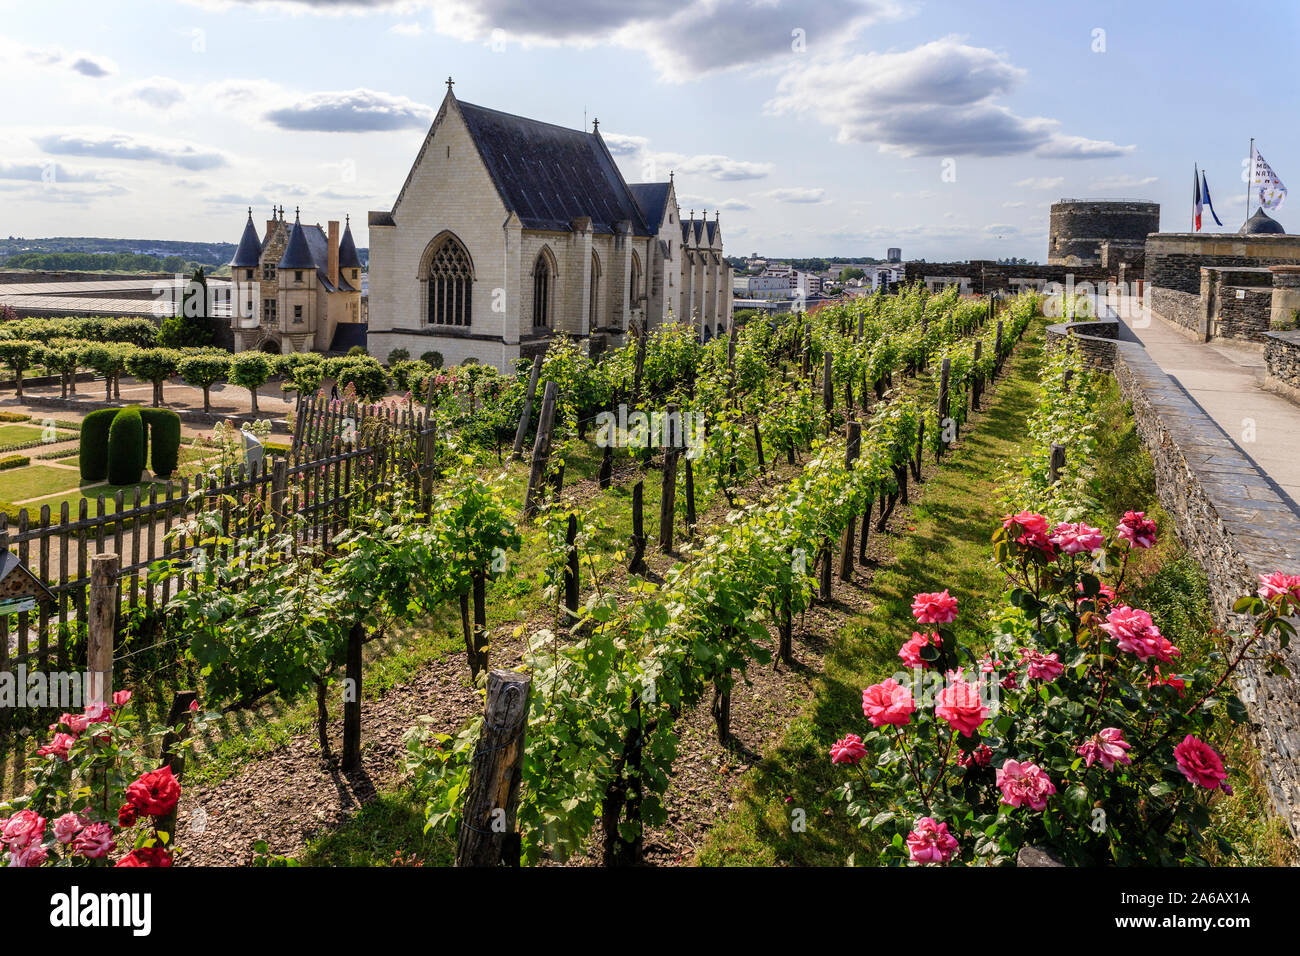 France, Maine et Loire, Angers, Chateau d’Angers, Angers castle, the Hanging vine garden, white Chenin grape variety, rows of vines and the chapel // Stock Photo